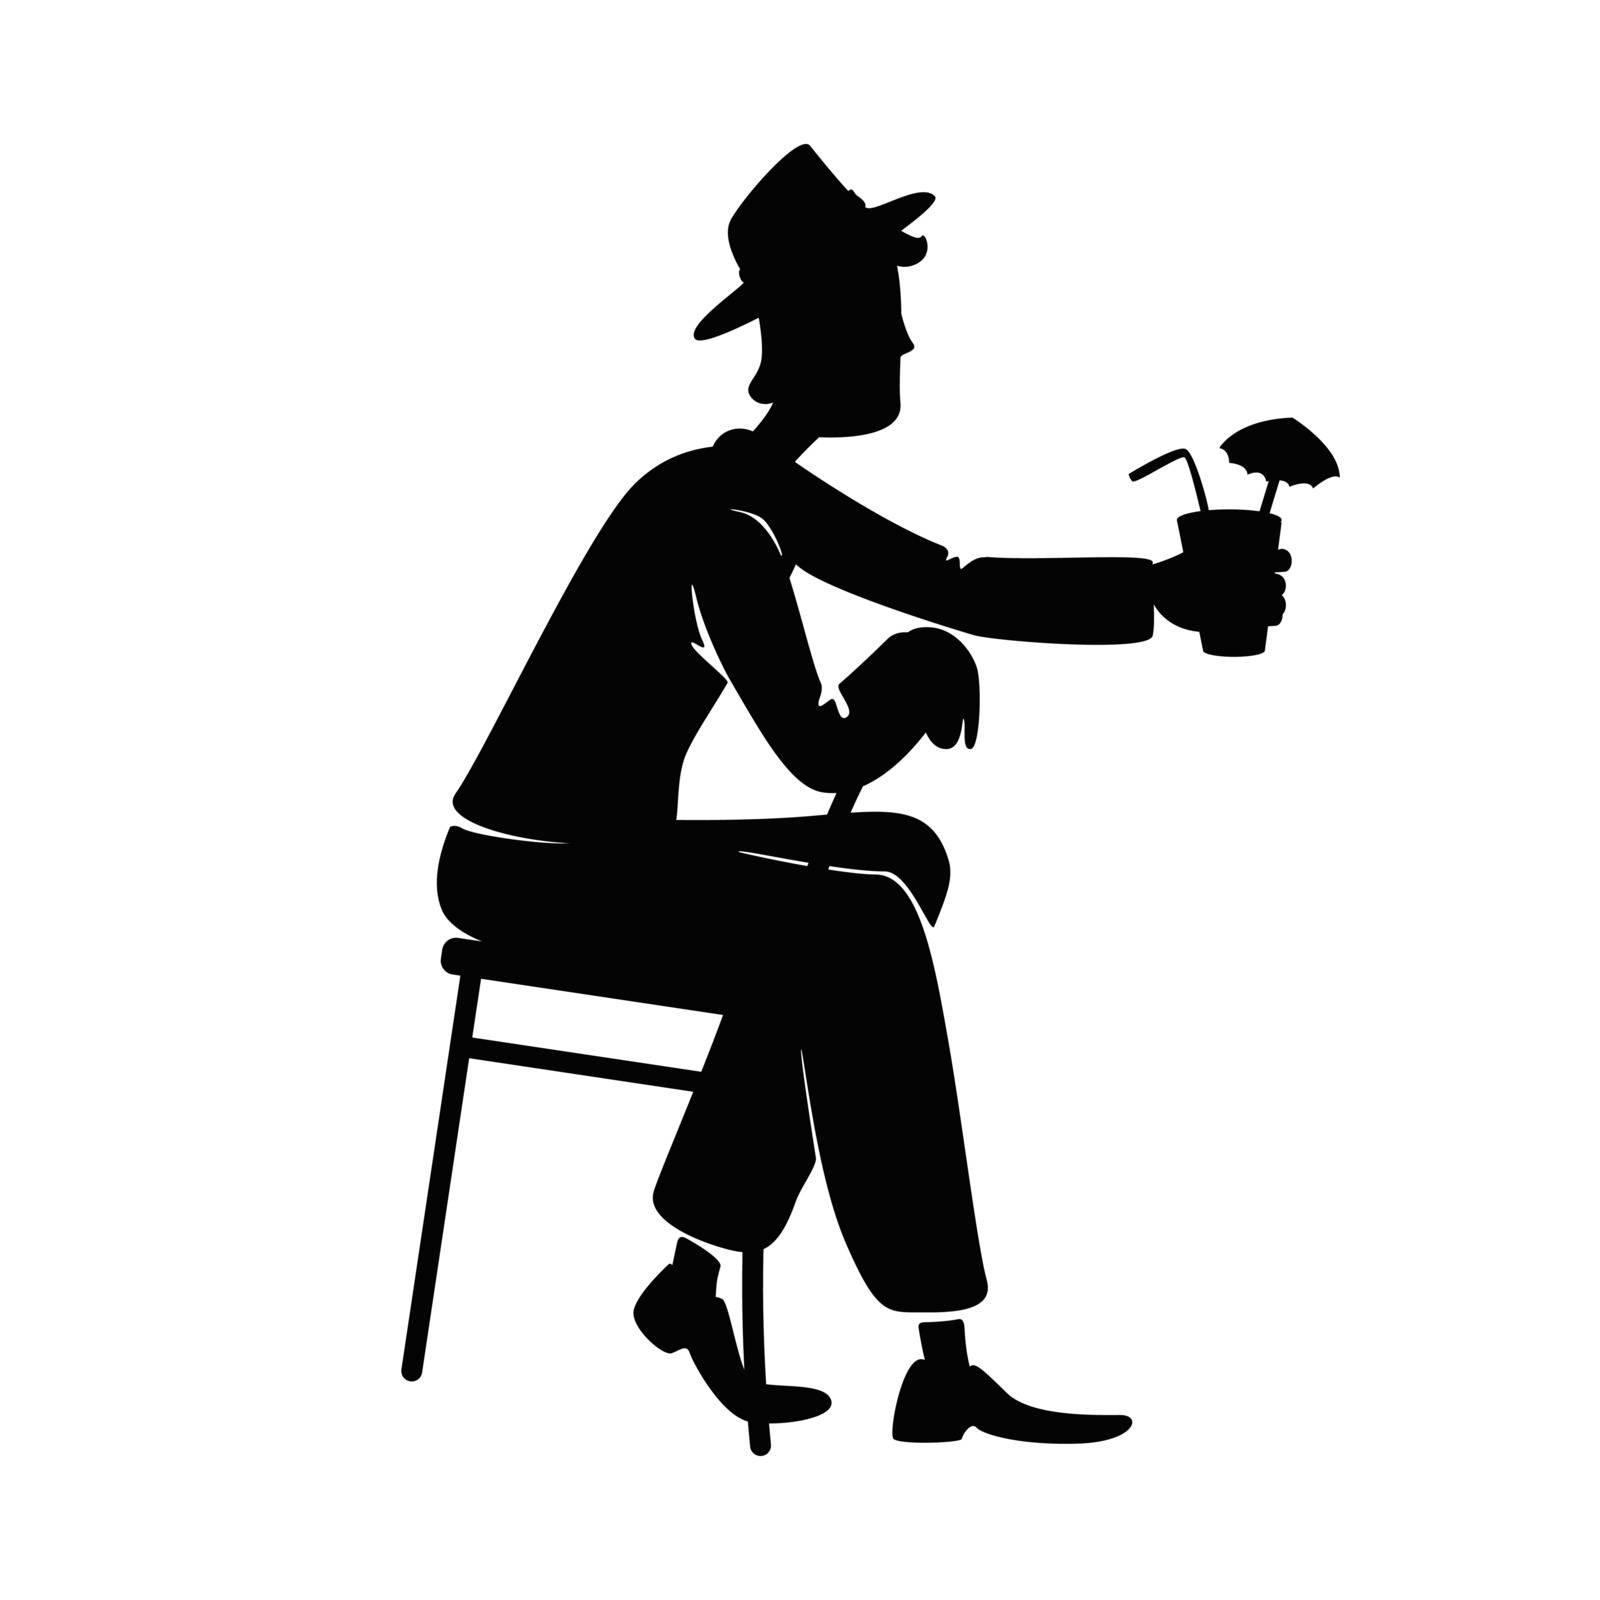 Man drinking alcohol black silhouette vector illustration. Sitting on chair person pose. Old fashioned gentleman in hat with cocktail 2d cartoon character shape for commercial, animation, printing